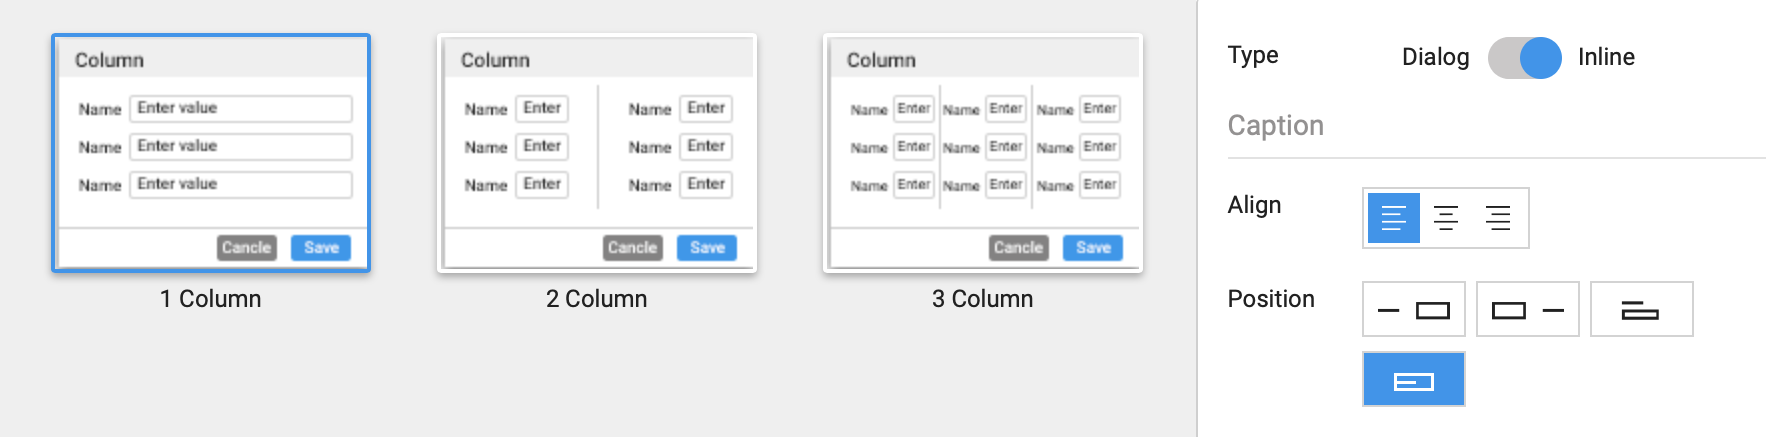 form layout selection